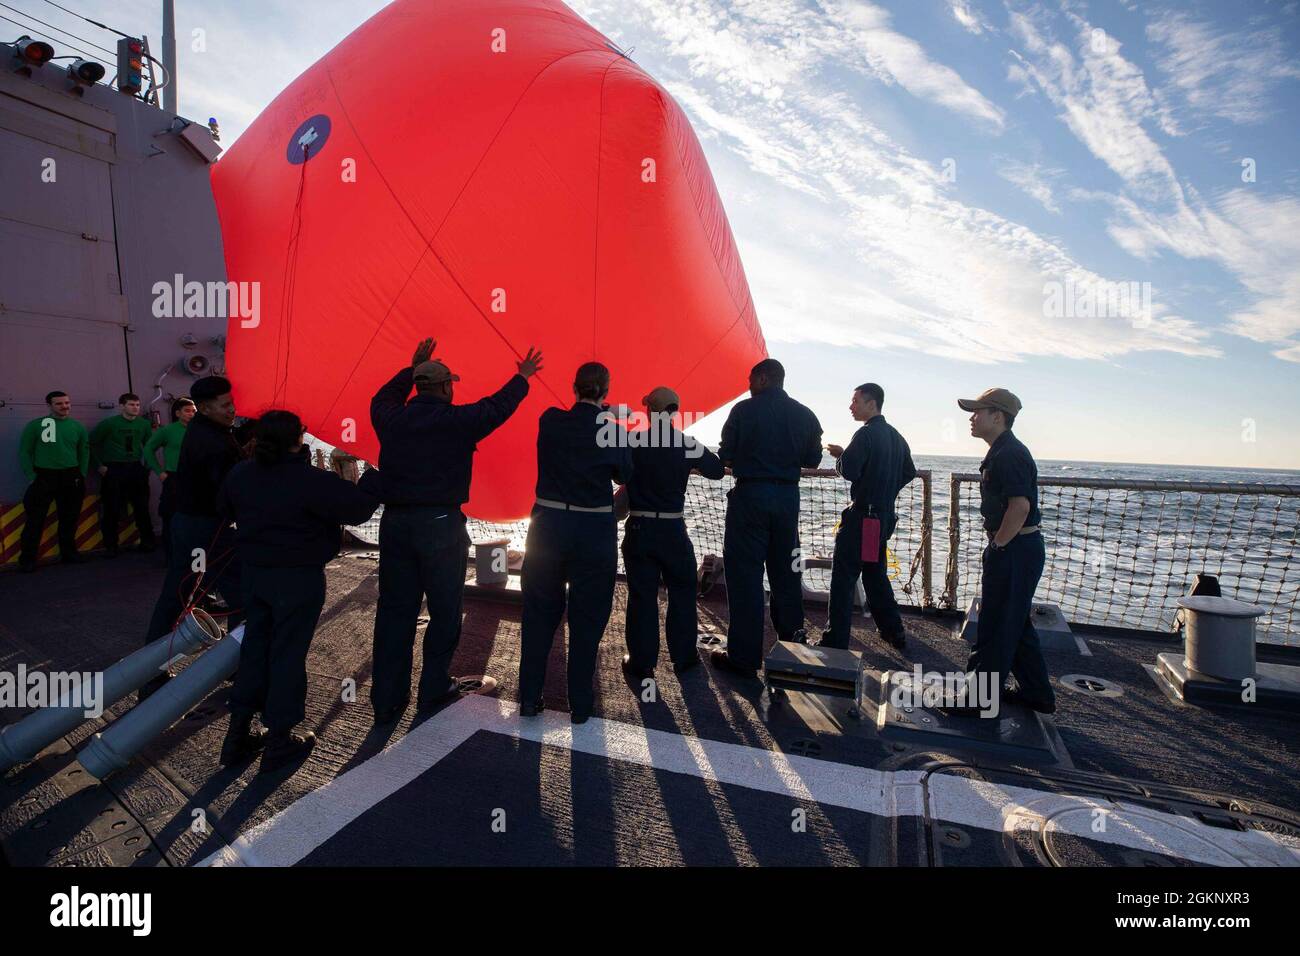 BALTIC SEA (June 9, 2021) Sailors aboard the Arleigh Burke-class guided-missile destroyer USS Roosevelt (DDG 80) prepare to deploy an inflatable target for a live-fire gunnery exercise during Baltic Operations 50, June 9, 2021. The 50th BALTOPS represents a continuous, steady commitment to reinforcing interoperability in the Alliance and providing collective maritime security in the Baltic Sea. Stock Photo